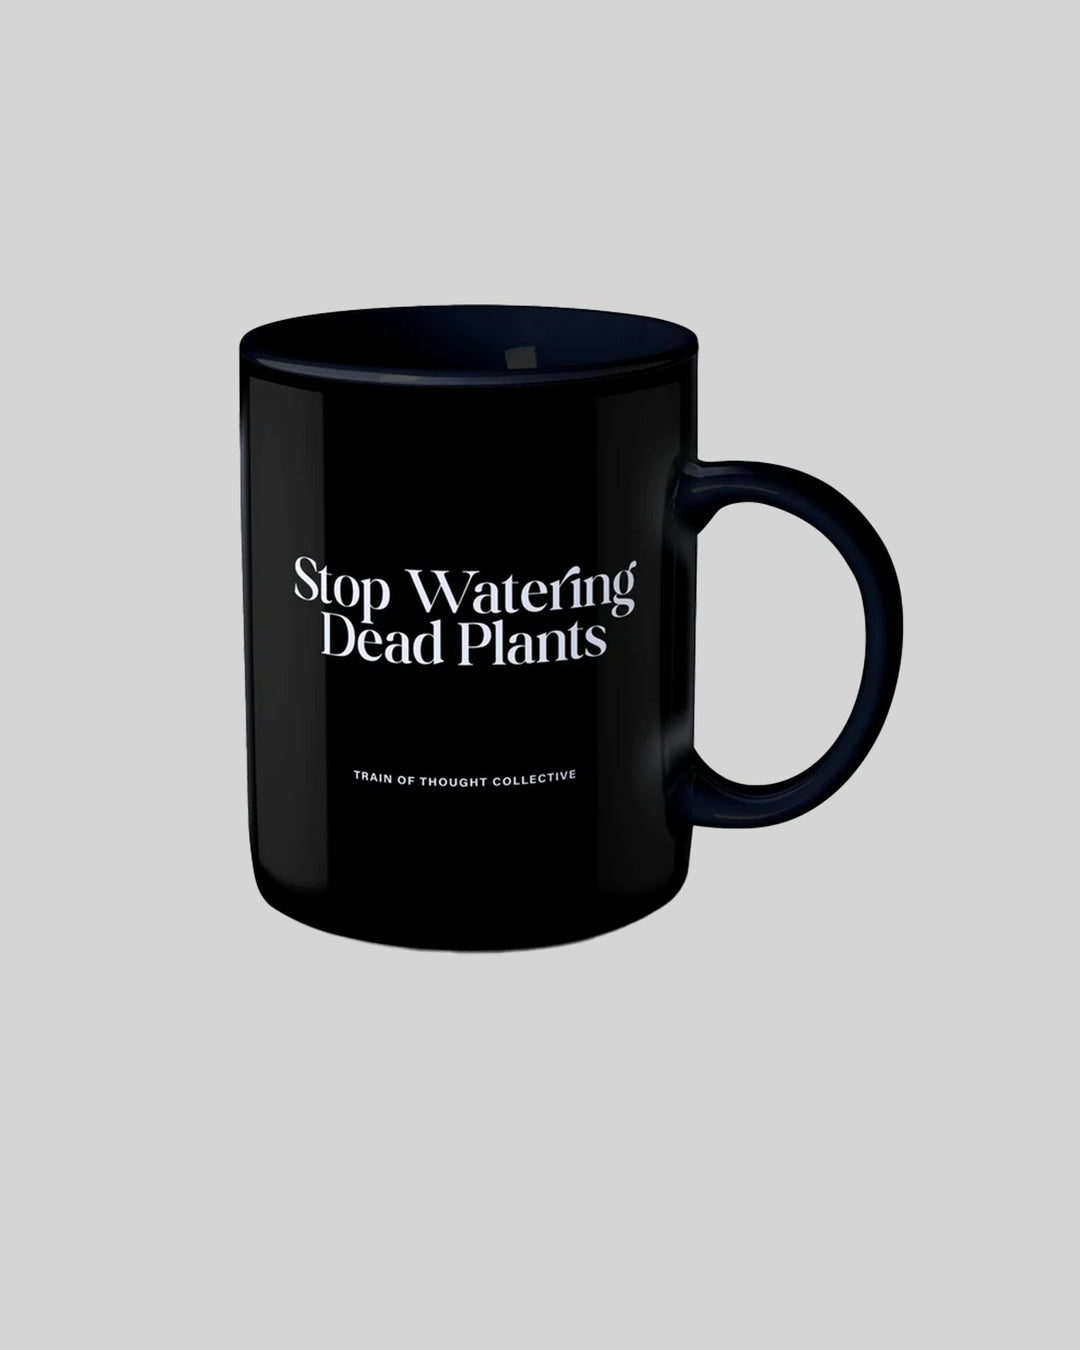 Stop Water Dead Plants Coffee Mug - trainofthoughtcollective